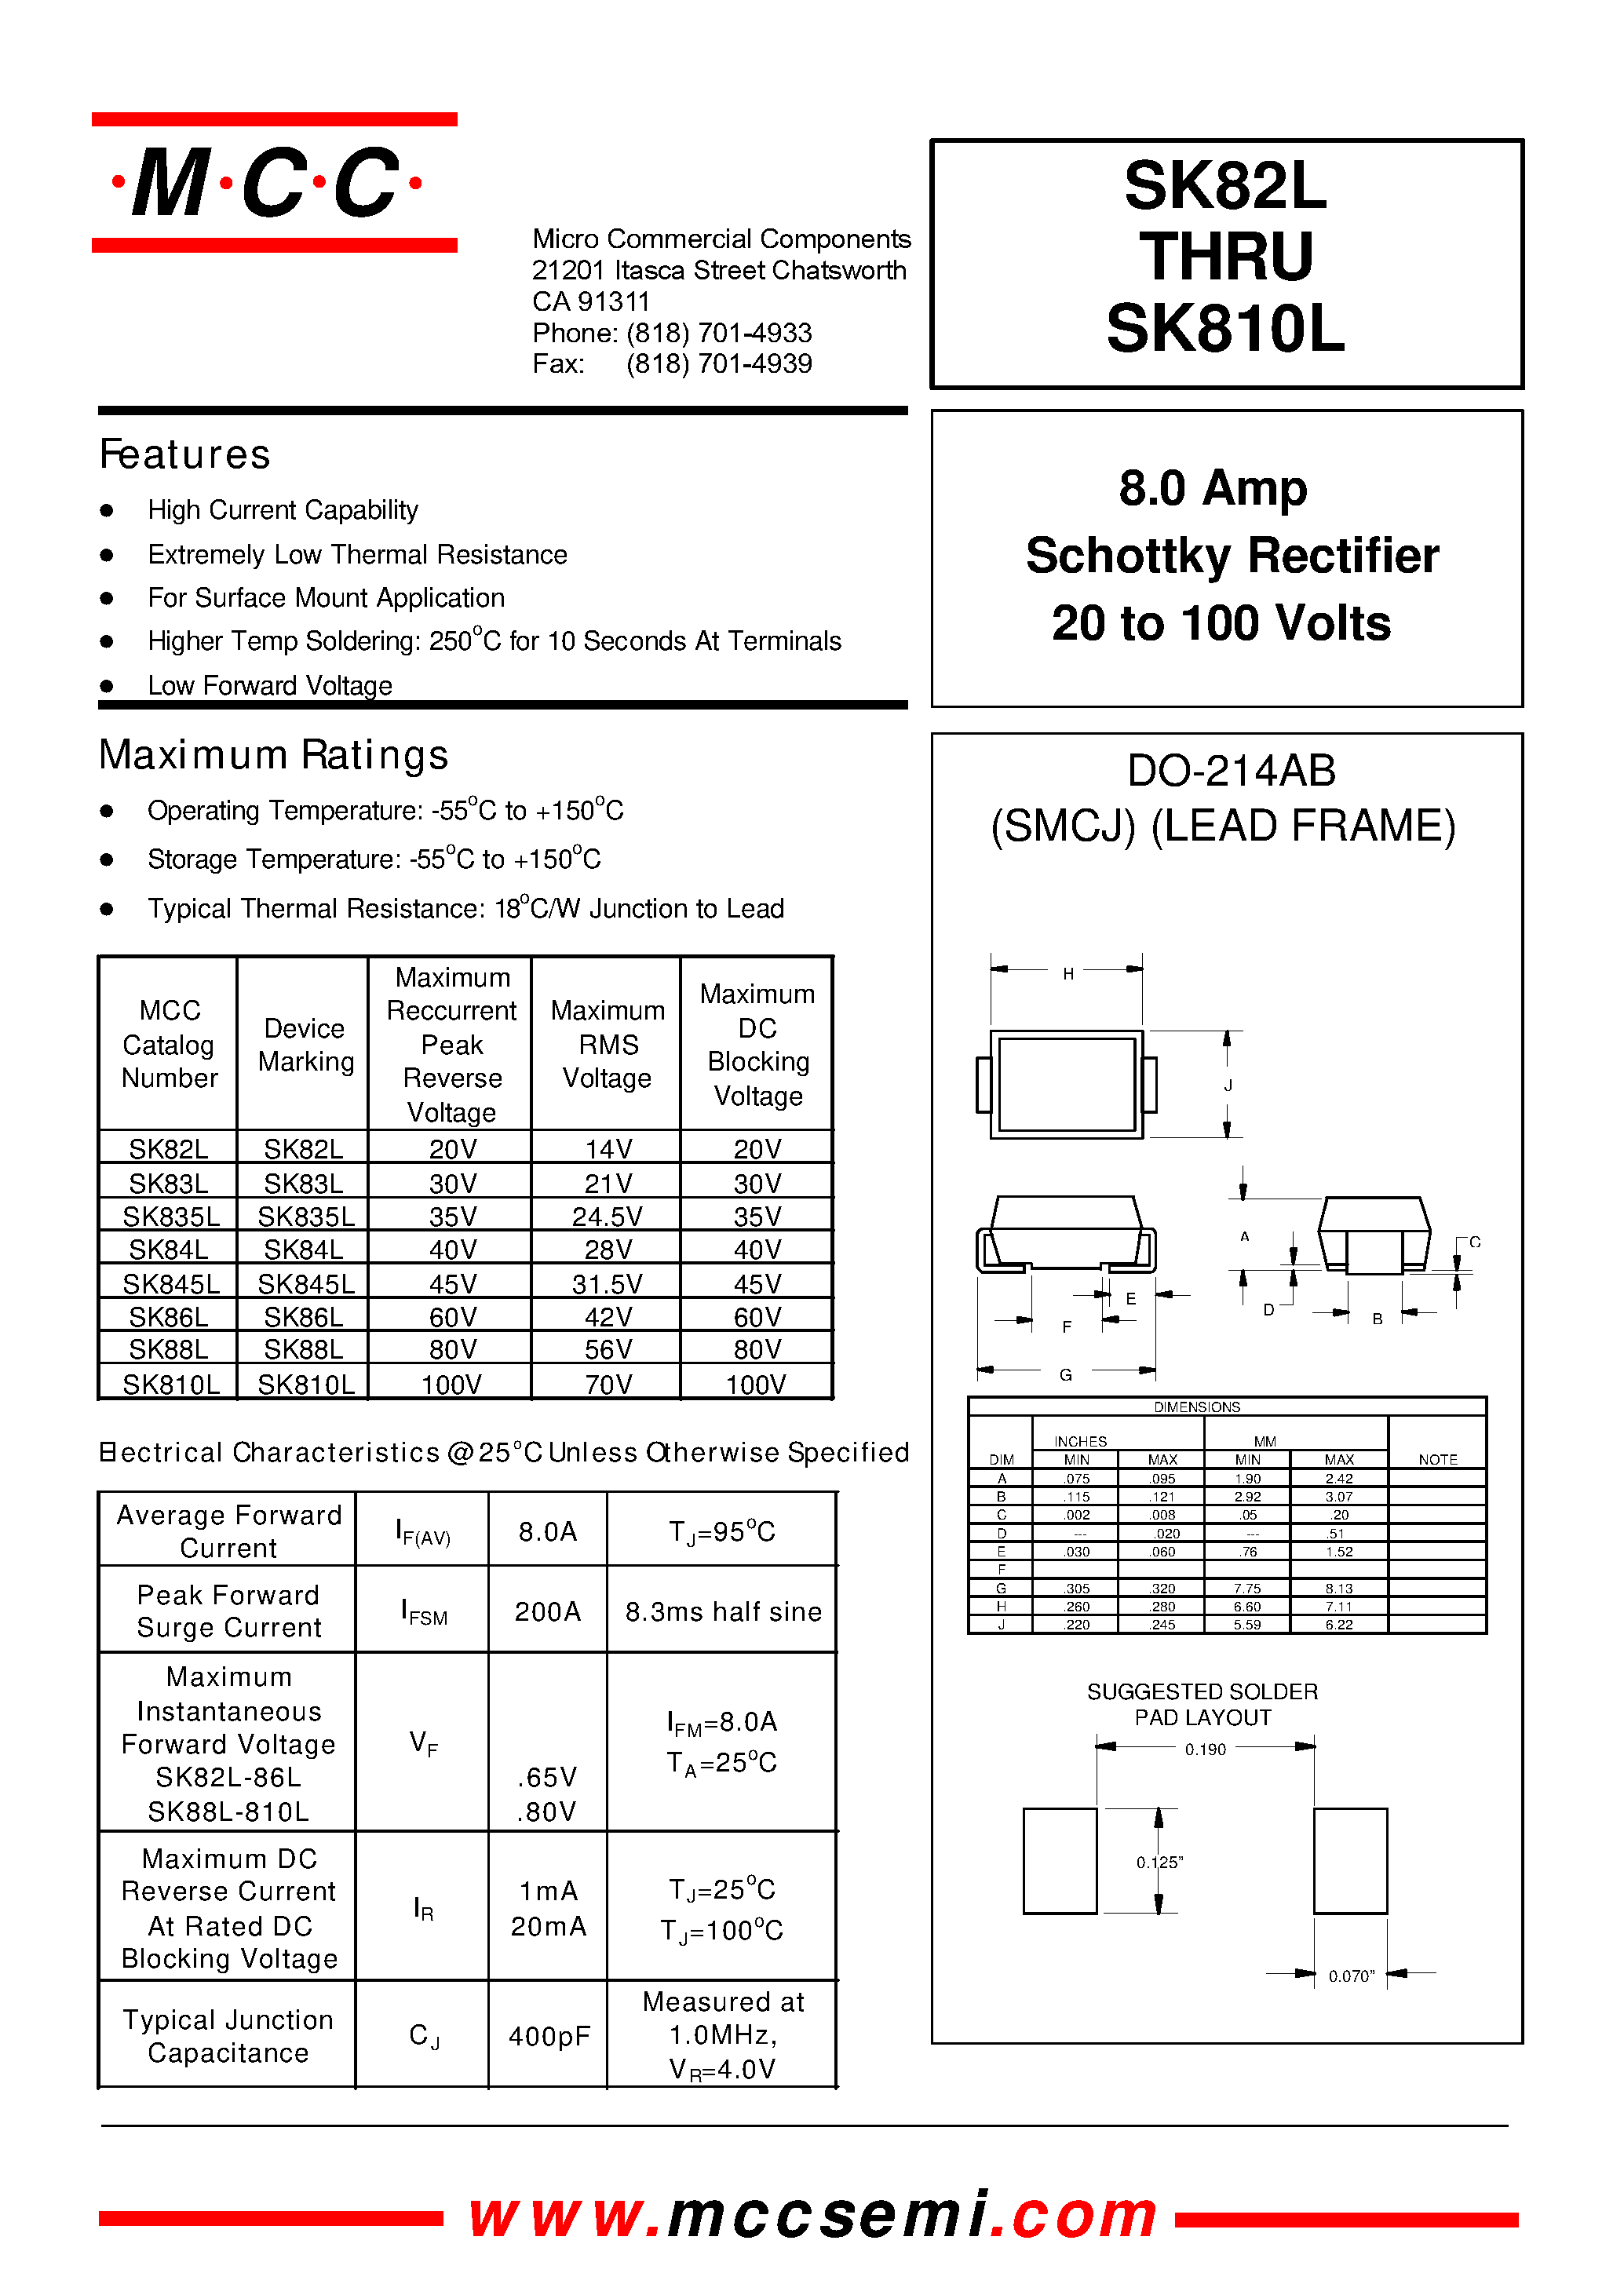 Datasheet SK83L - 8.0 Amp Schottky Rectifier 20 to 100 Volts page 1